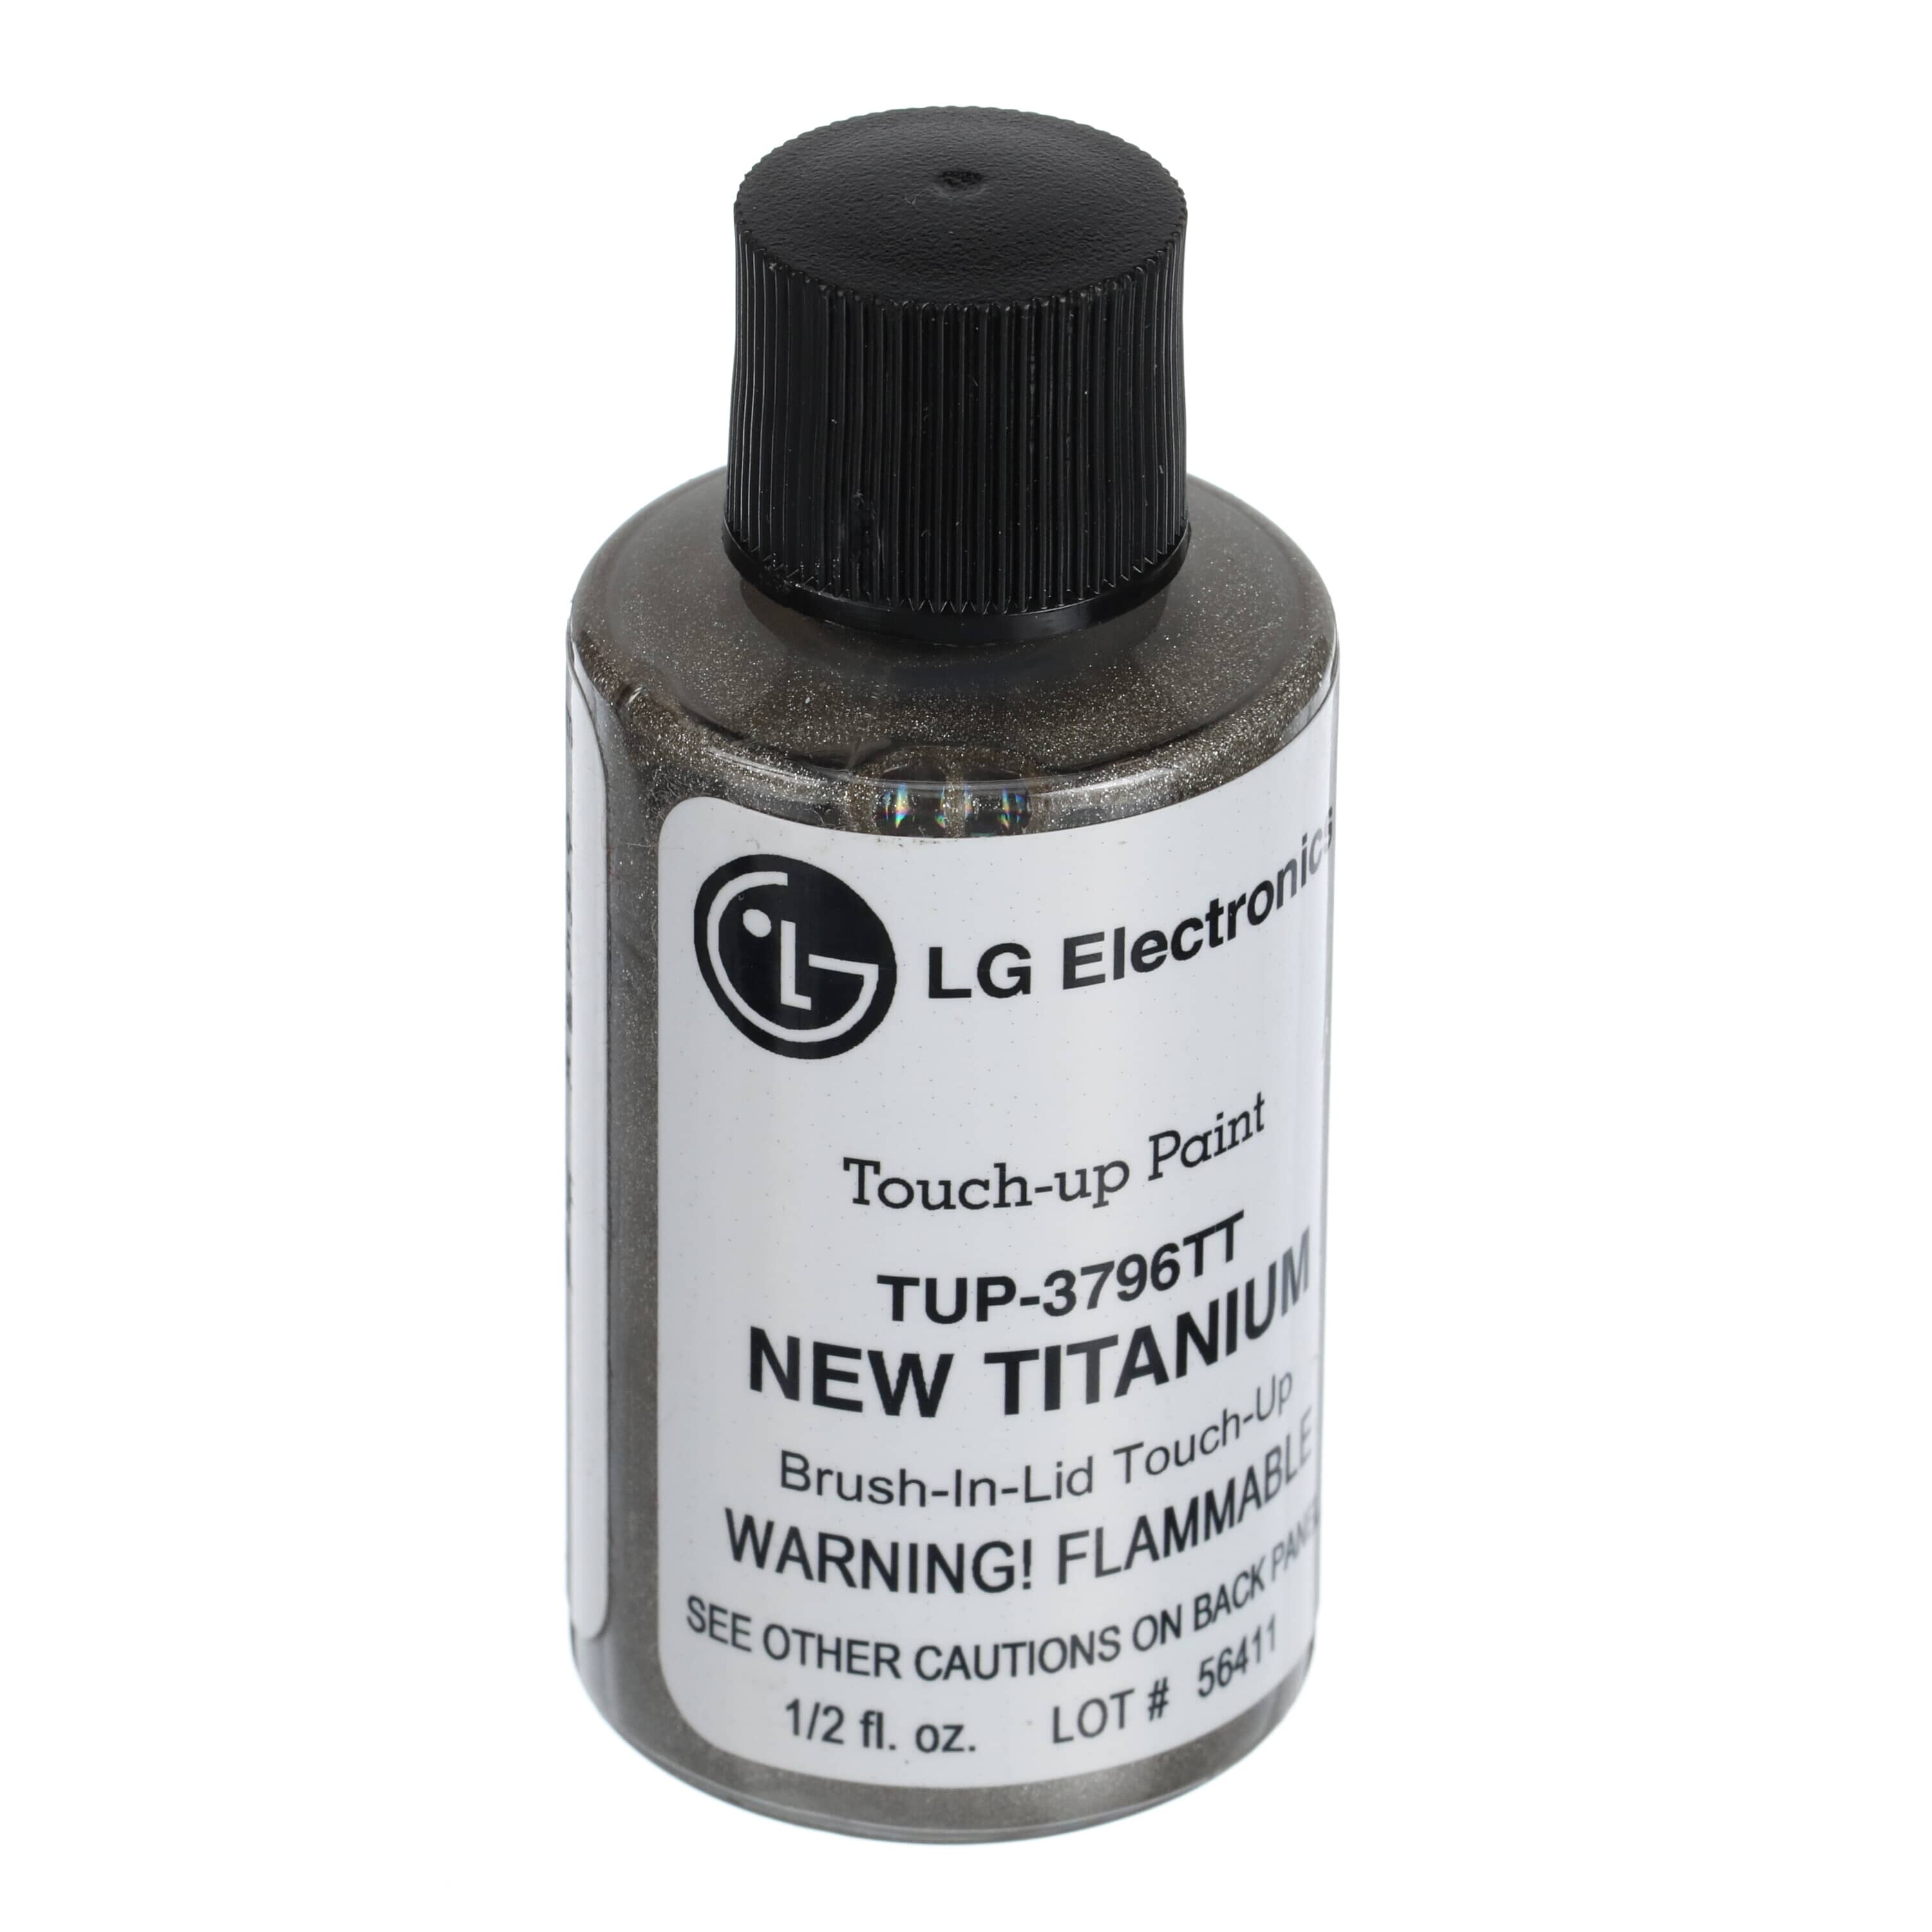 LG TUP-3796TT Washer/Dryer Touch-Up Paint, Titanium (Laundry Only)